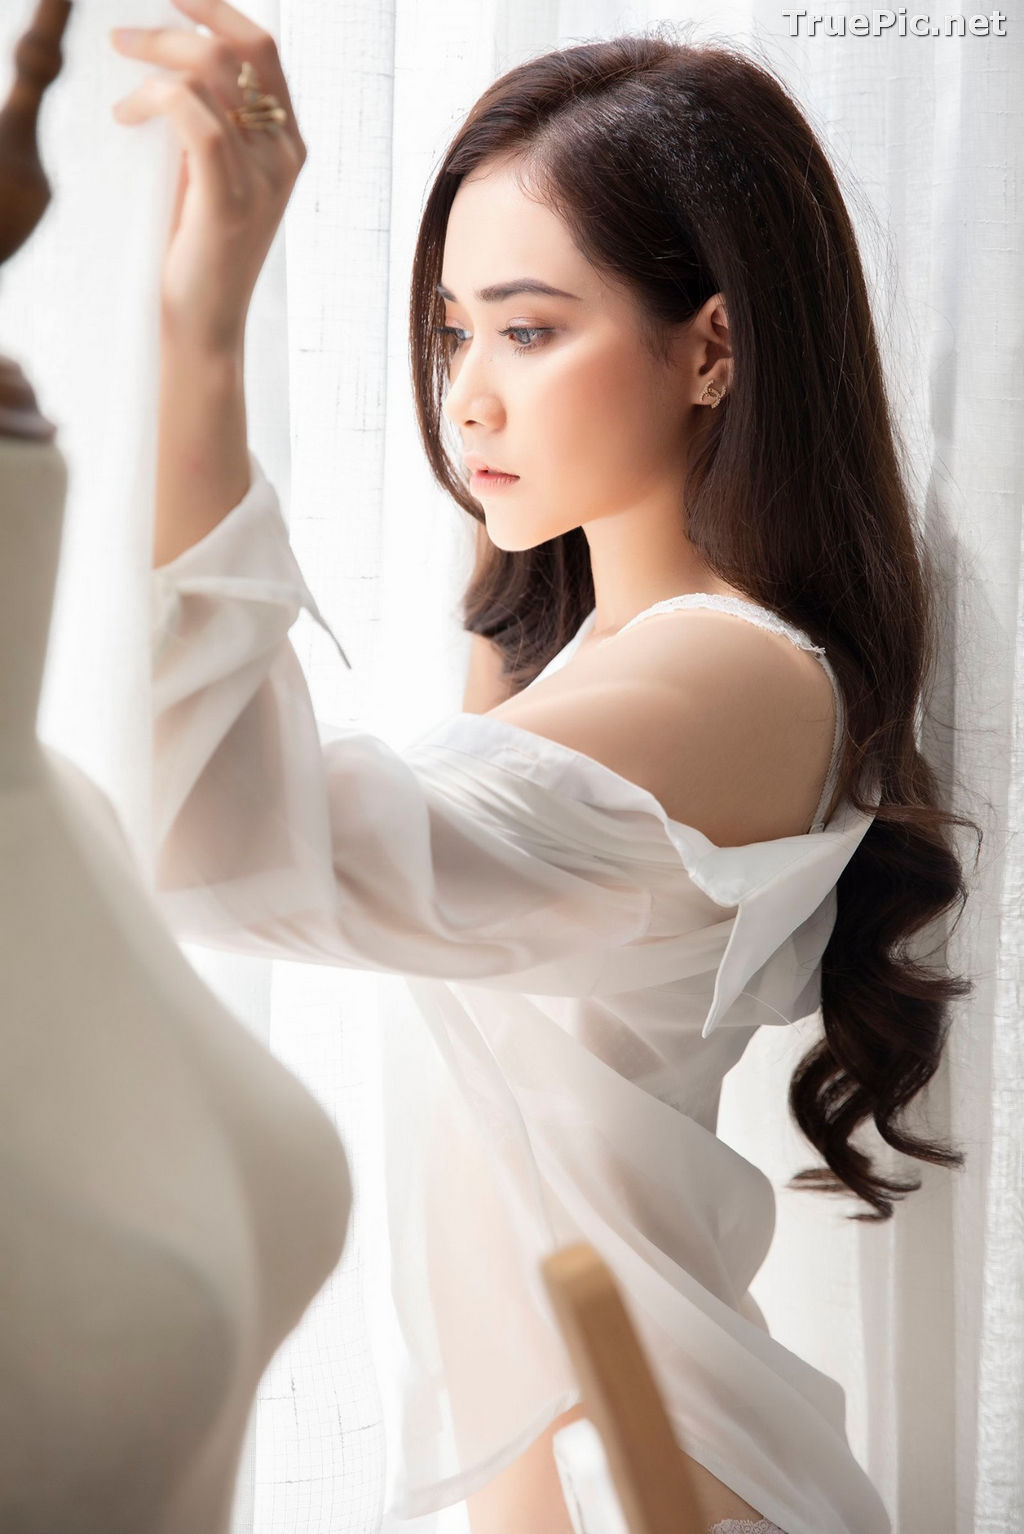 Image Vietnamese Model - Hot Beautiful Girls In White Collection - TruePic.net - Picture-11